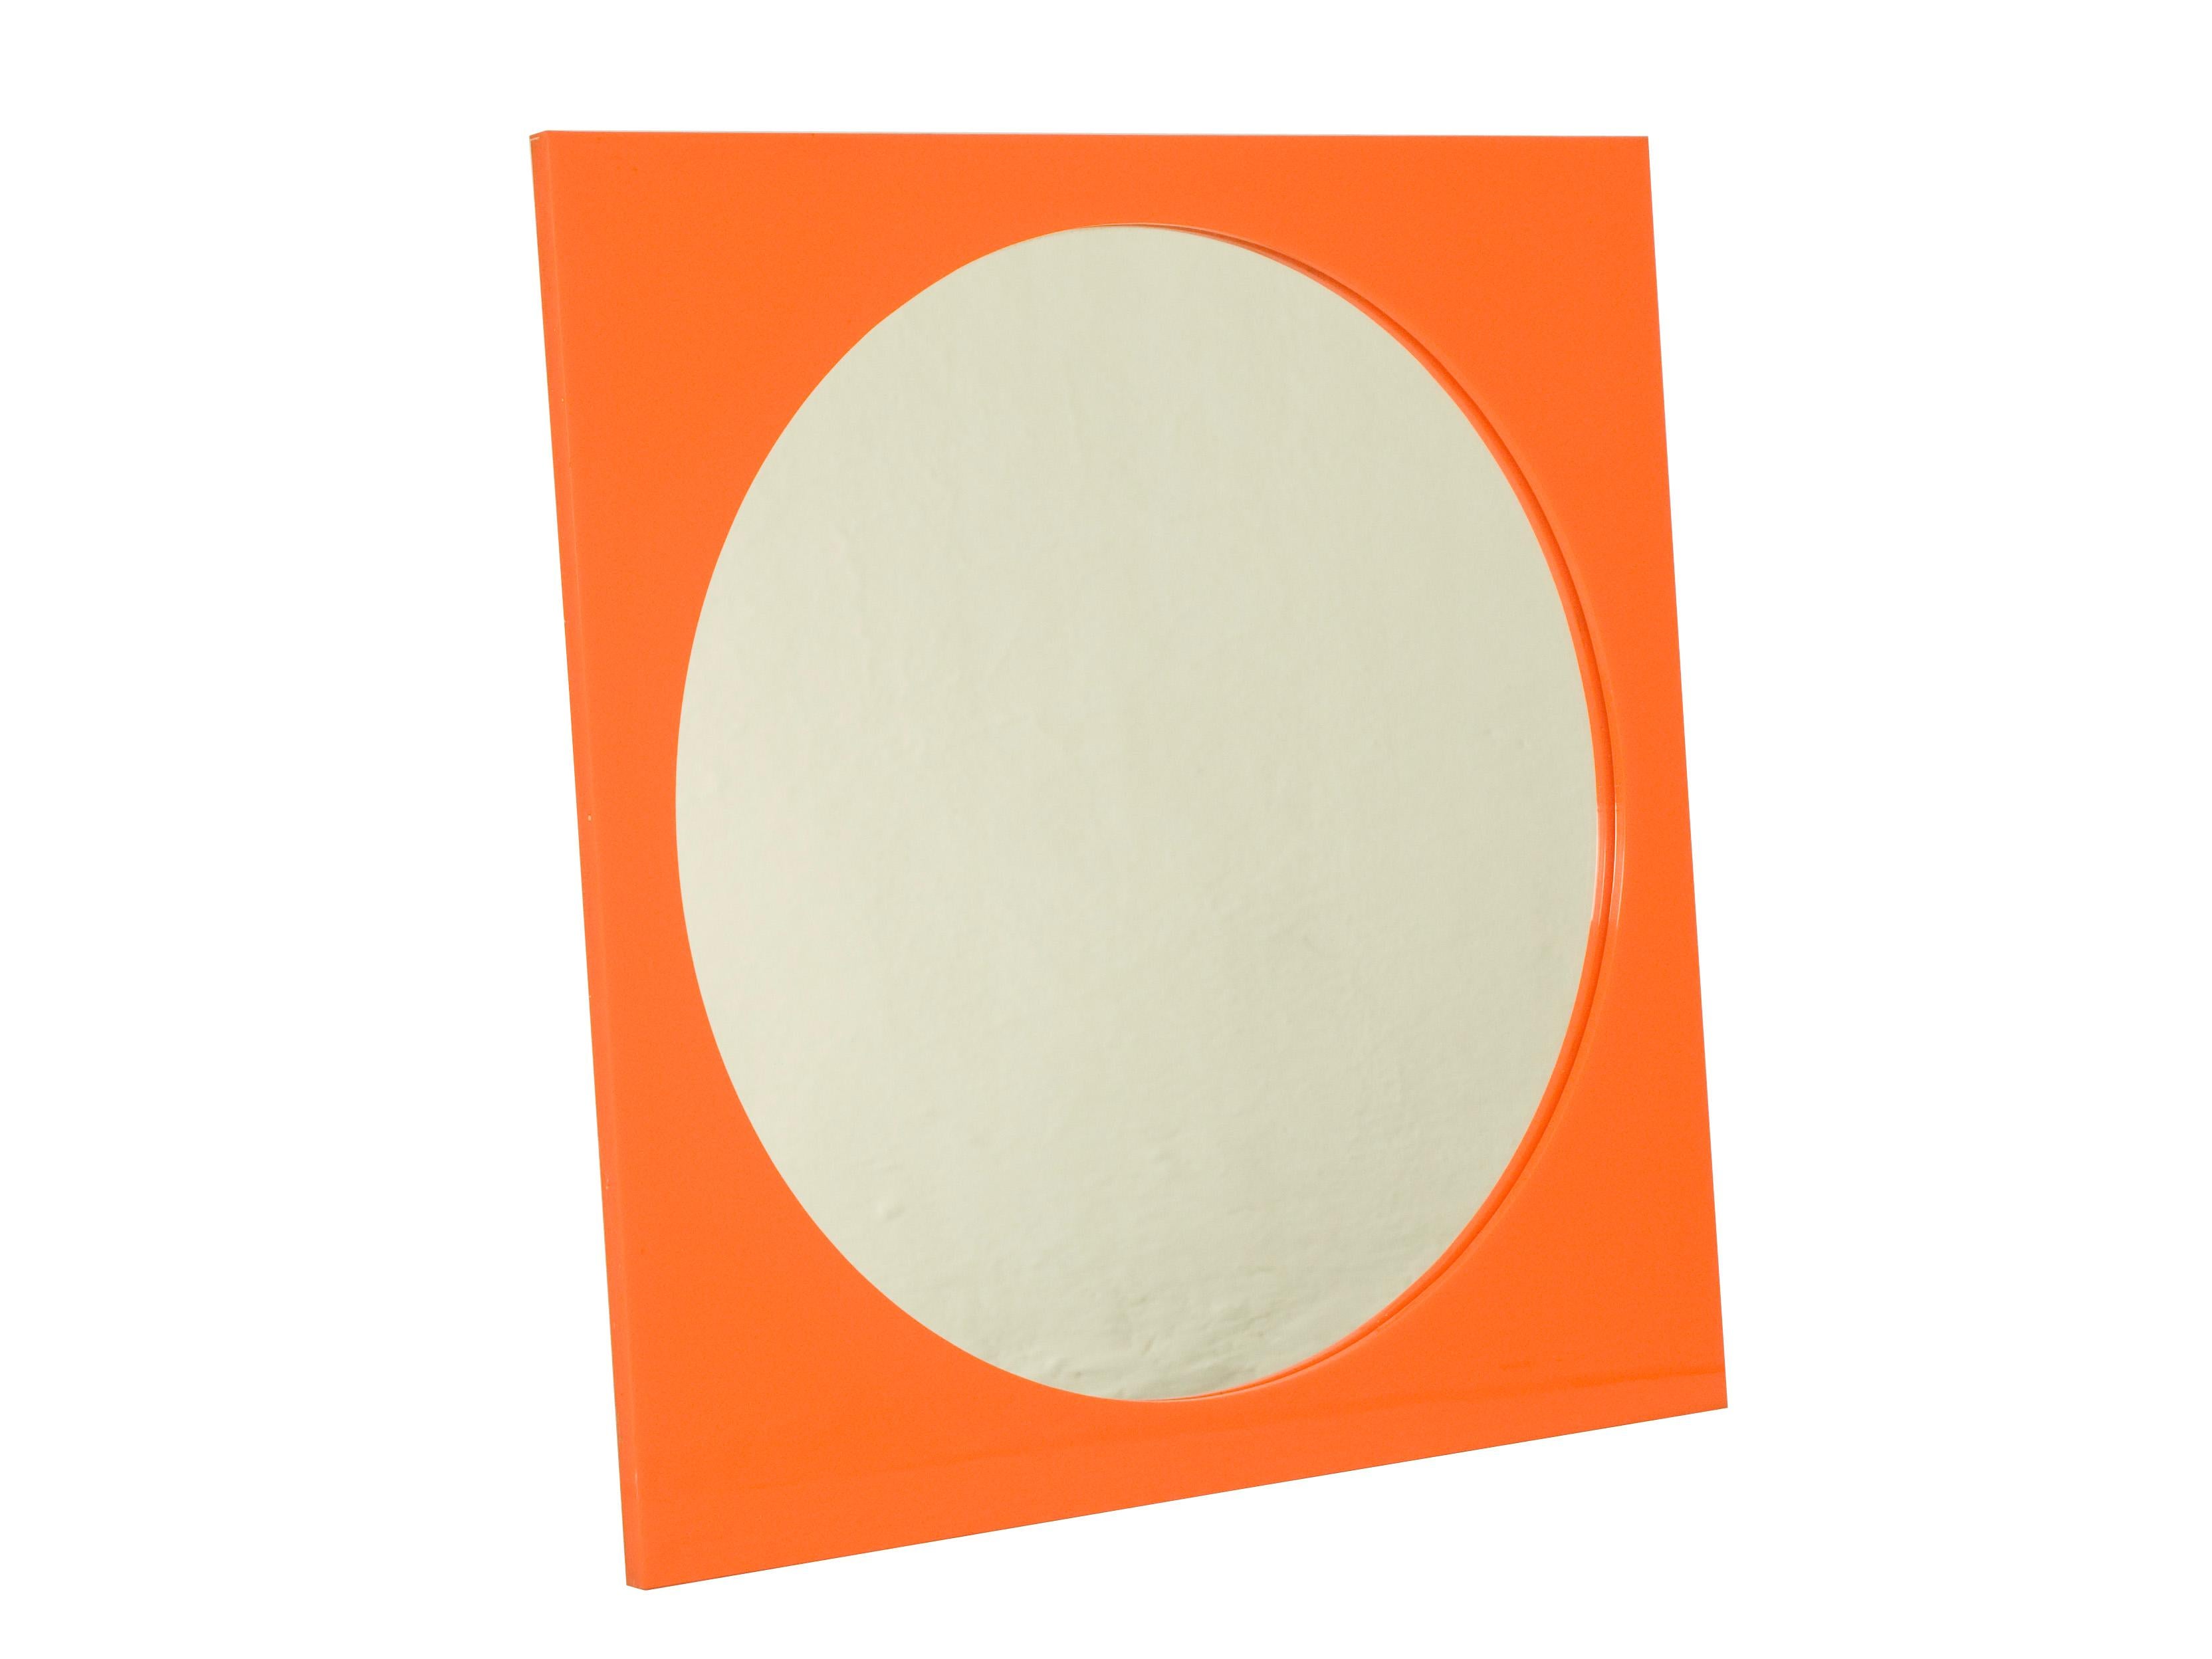 Italian Orange Methacrylate Square Mirror 4724/5 by G. Stoppino for Kartell